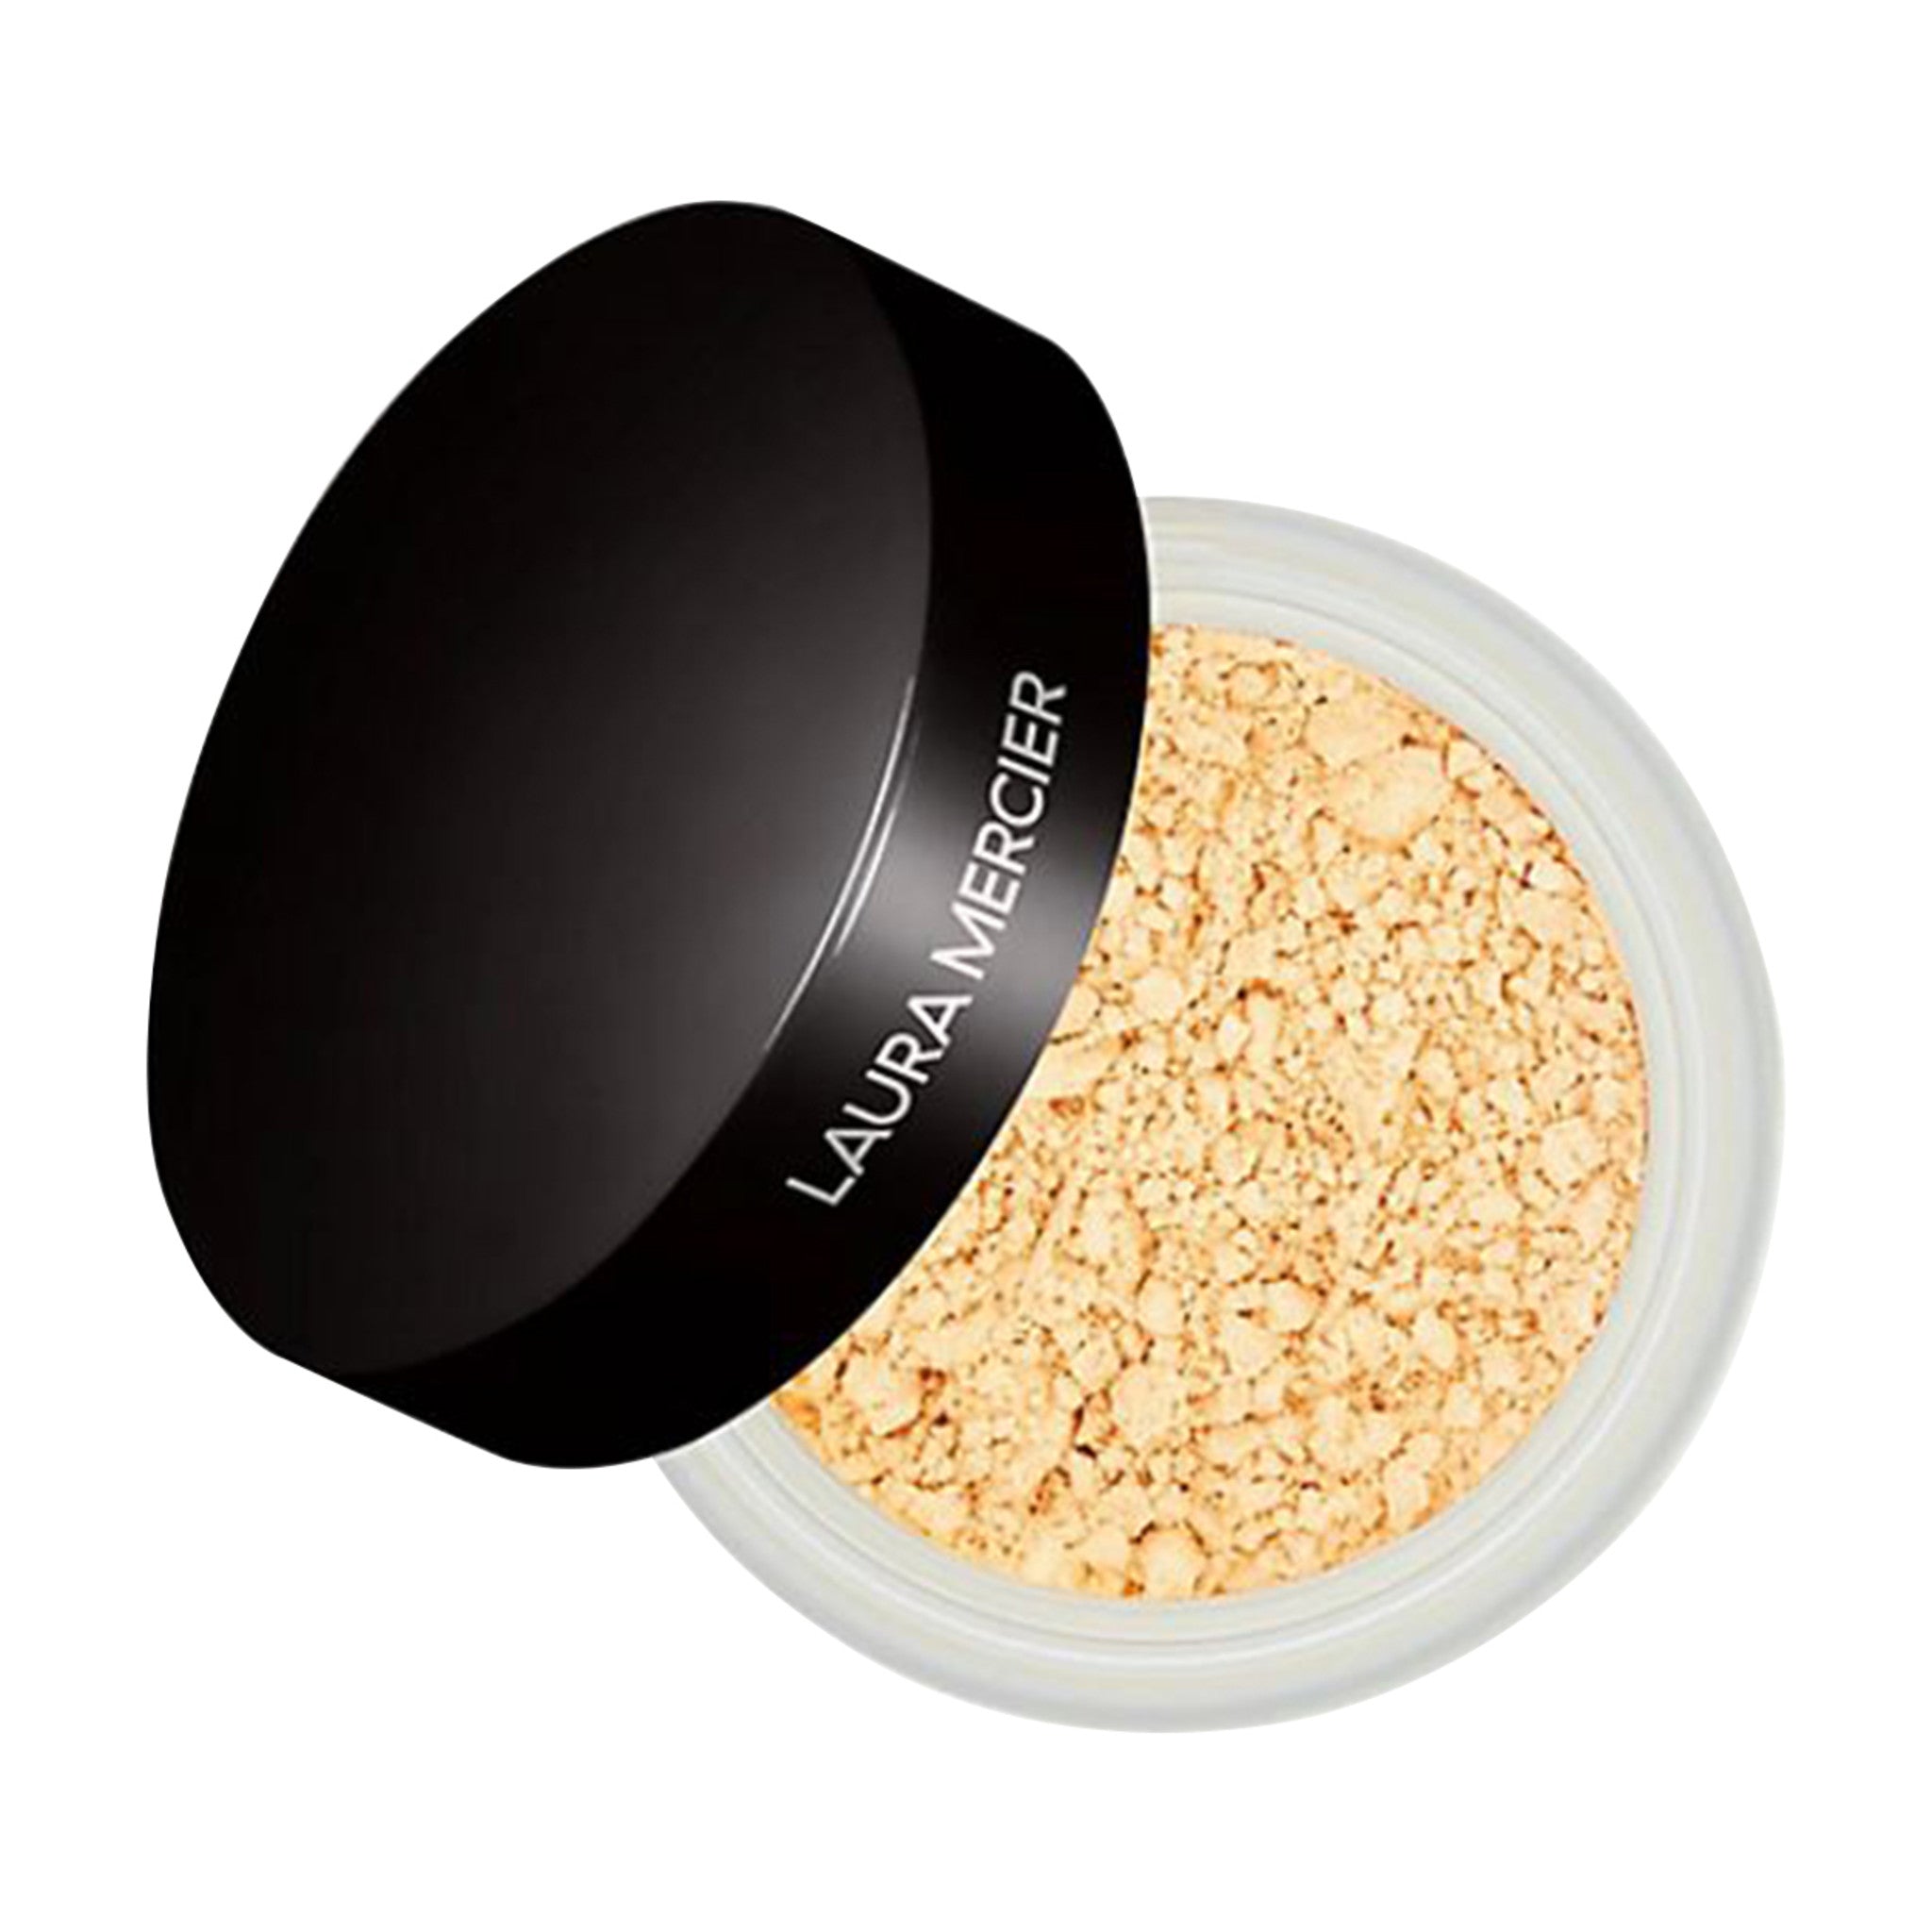 Laura Mercier Translucent Loose Setting Powder Color/Shade variant: Honey main image. This product is in the color nude, for medium complexions